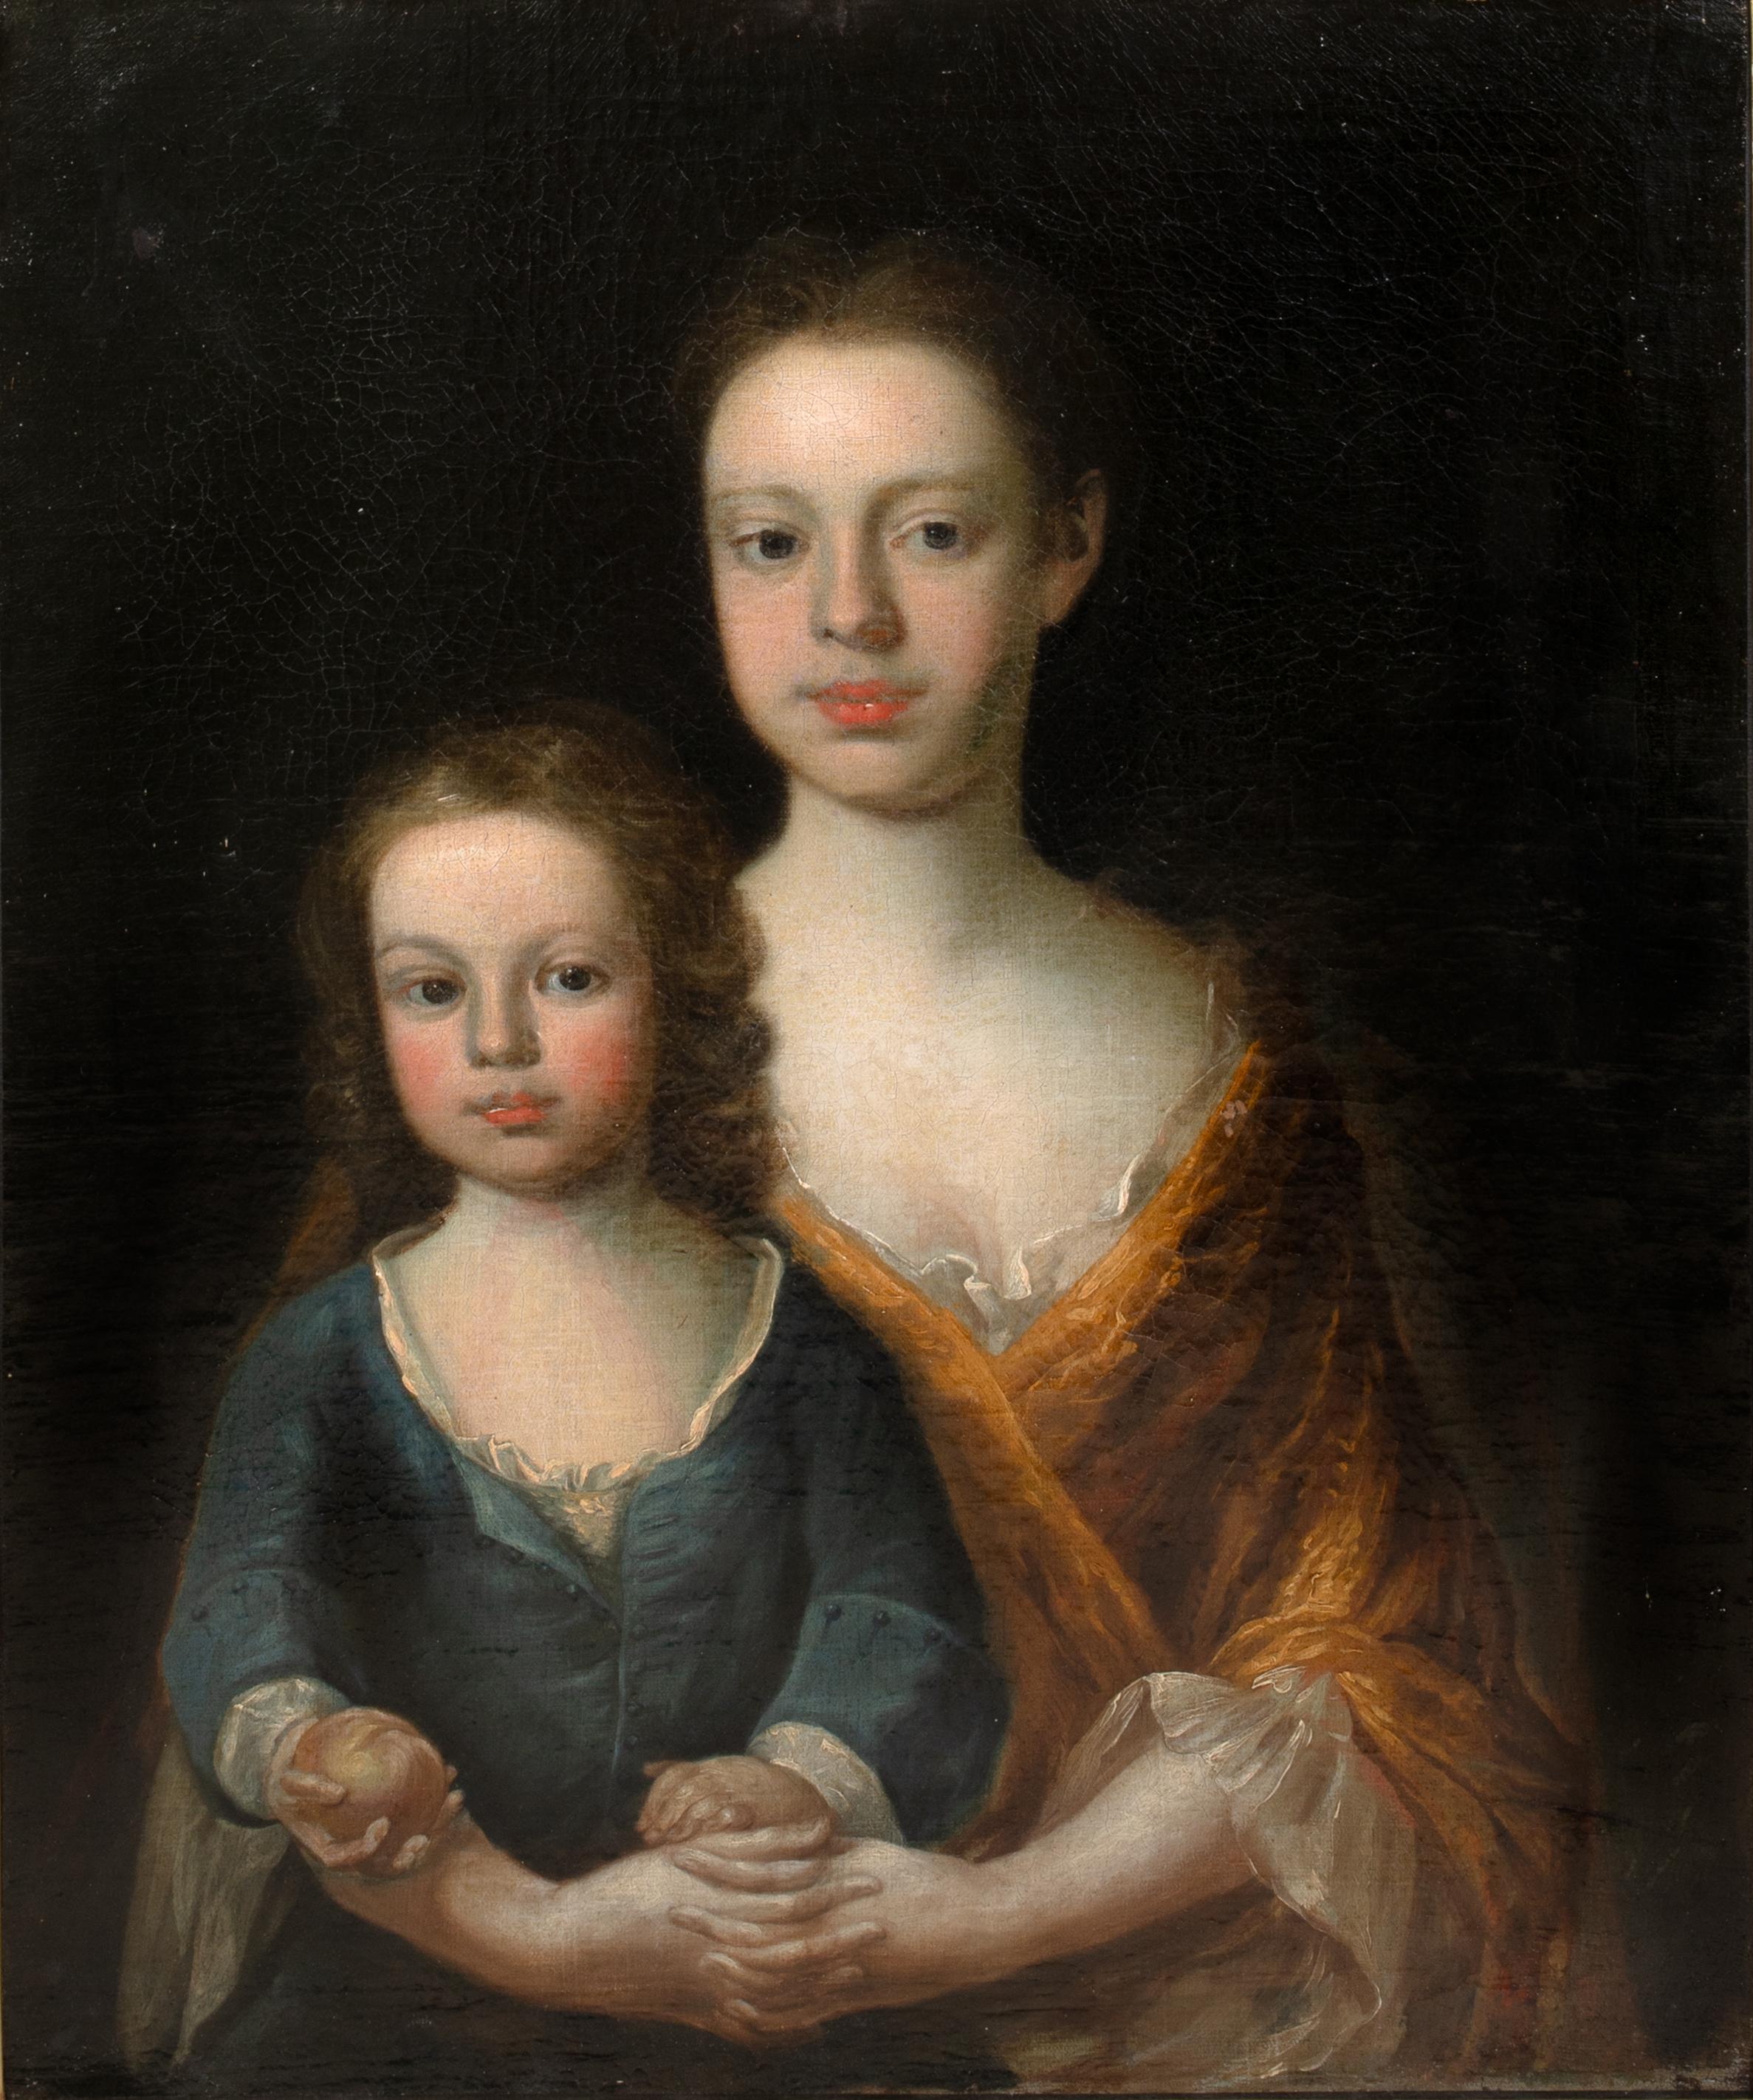 Portrait Of The Russell Sisters, 17th Century 

Studio of Michael DAHL (1659-1743)

Large circa 1700 English portrait of The Russell Sisters, oil on canvas fro the studio of Michael Dahl. Beautiful double portrait of the young sisters with the